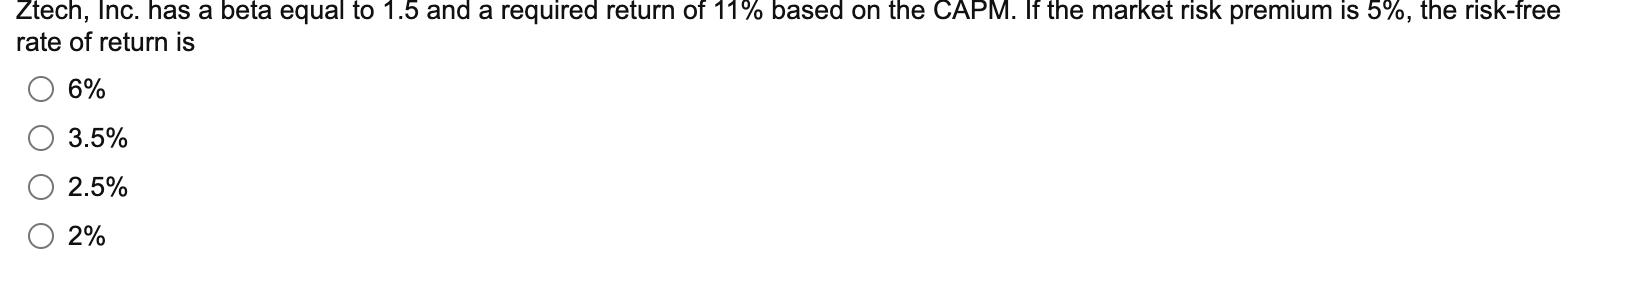 Ztech, Inc. has a beta equal to 1.5 and a required return of 11% based on the CAPM. If the market risk